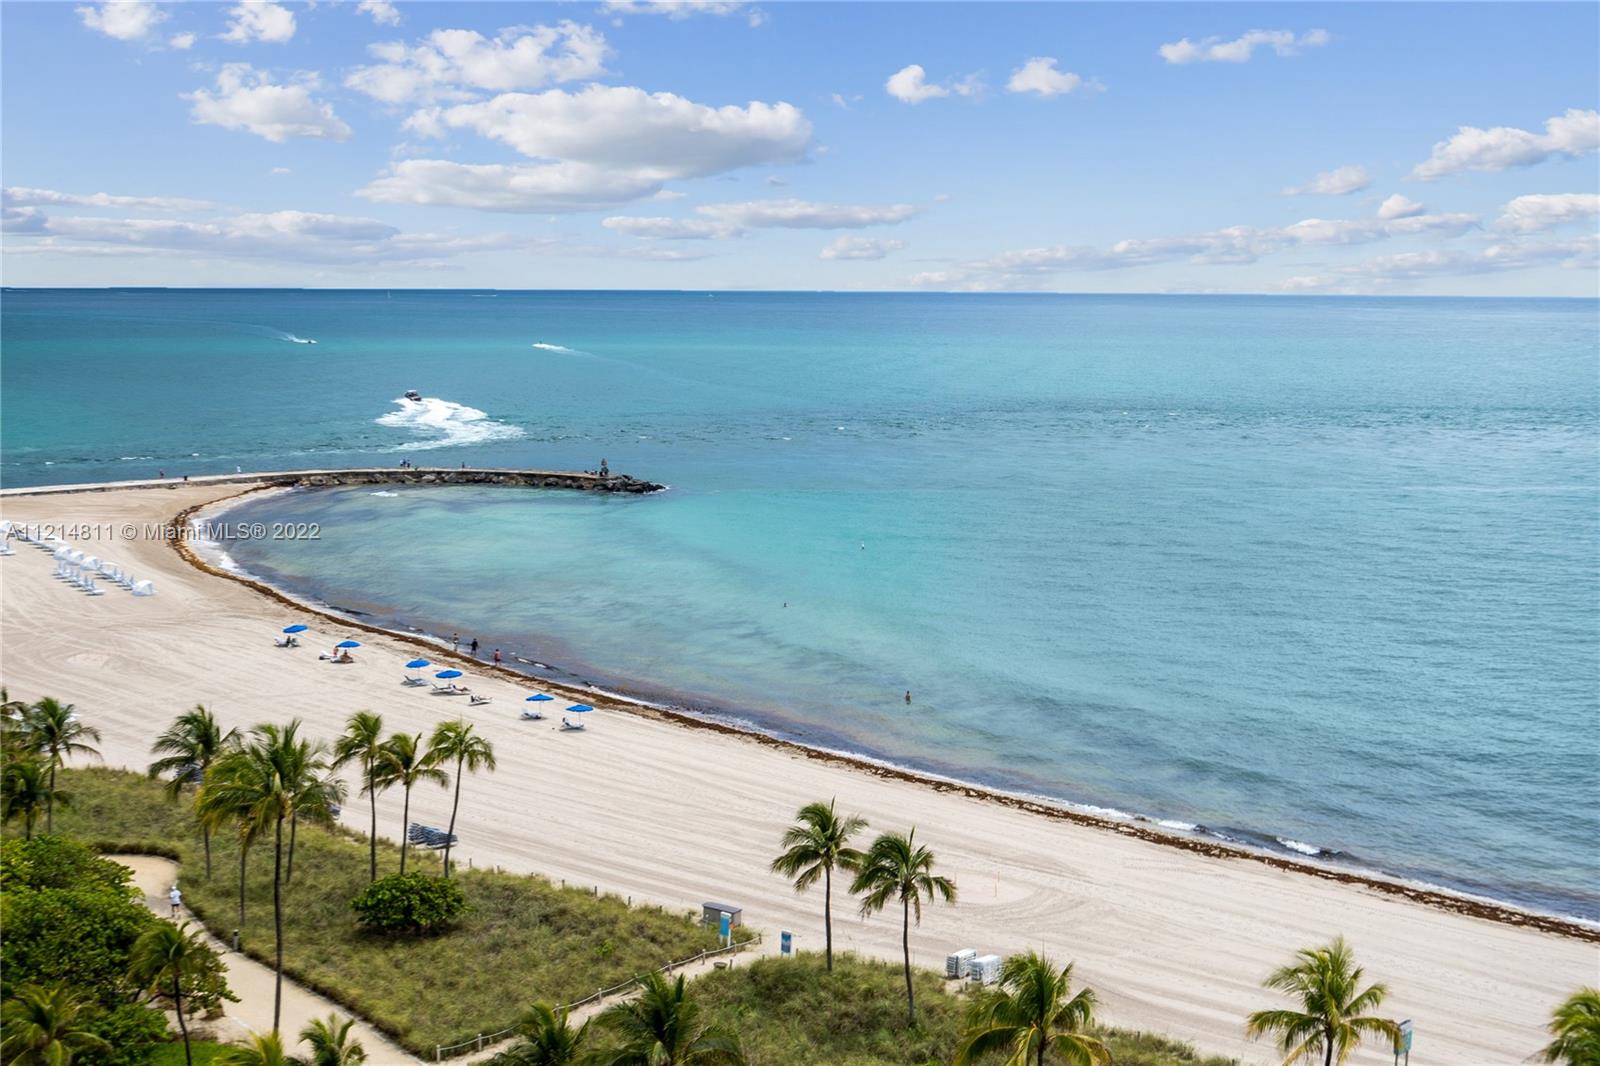 Elegant remodeled oceanfront 3 bedroom 5.5 bathroom unit in Bal Harbour, with independent staff and laundry room. This expansive 3,800+Sq ft unit offers the most desirable South East exposure with a wrap around balcony allowing for the best indoor/outdoor living. Private elevator, 10 foot ceilings, recessed lightings, design chandeliers, custom kitchen cabinets and motorized window treatments are among the many features that give this Oceanside residence a one of a kind feel. Enjoy infinite views of the Ocean, North to South, the Bal Harbour pier, the afternoon sun on the South terrace and sunset views over the intracoastal. Bellini offers an on site restaurant/cafe' with indoor and outdoor seating, swimming pool, beach service, fitness center and Spa.